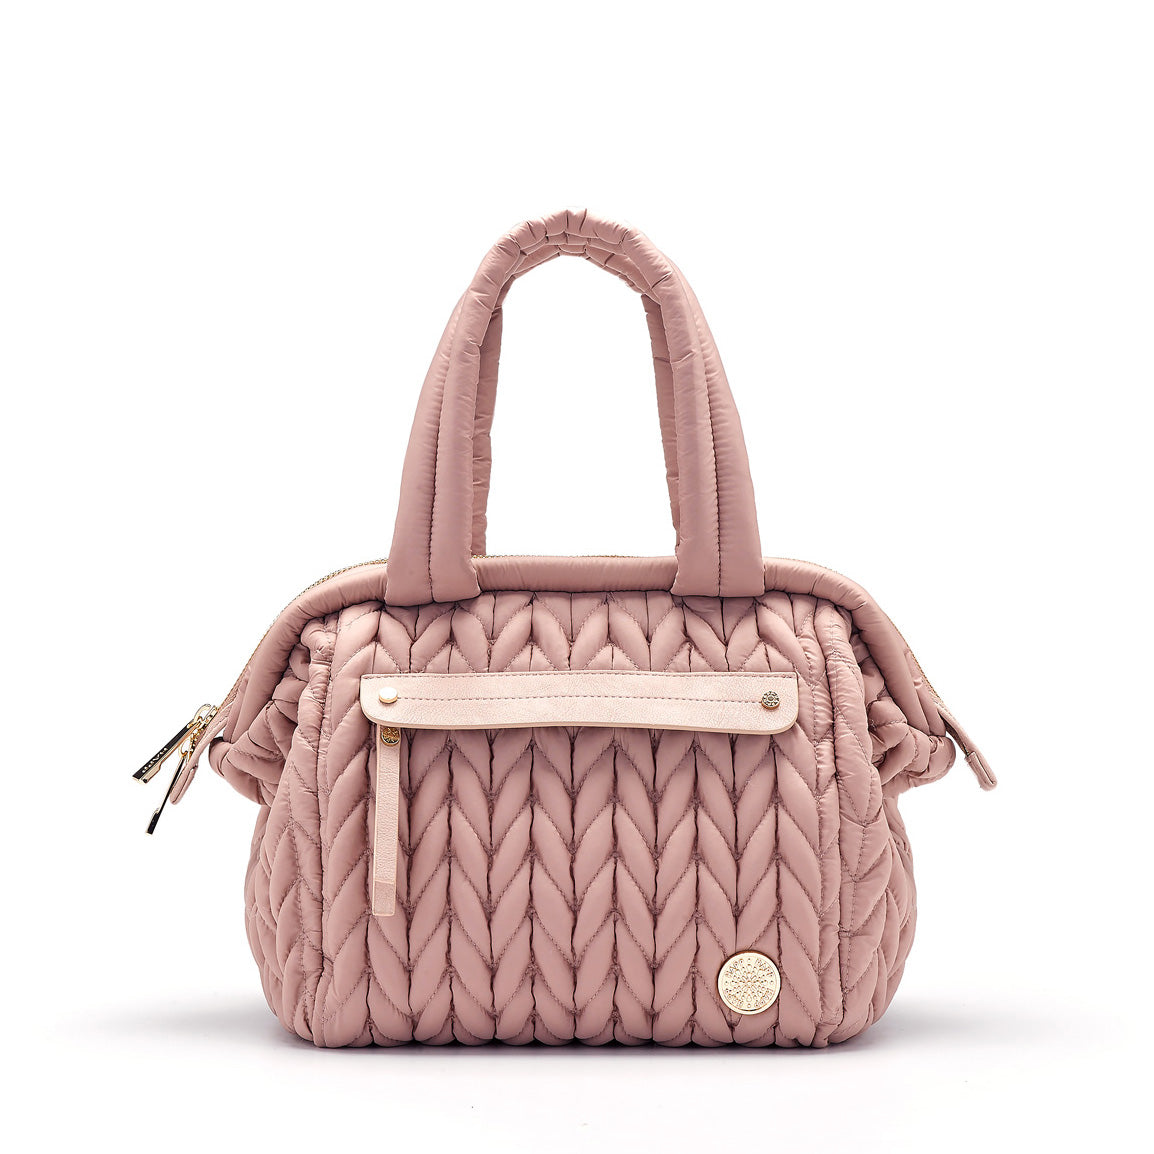 Paige mini purse small handbag style diaper bag in dusty rose blush pink quilted herringbone nylon with gold hardware